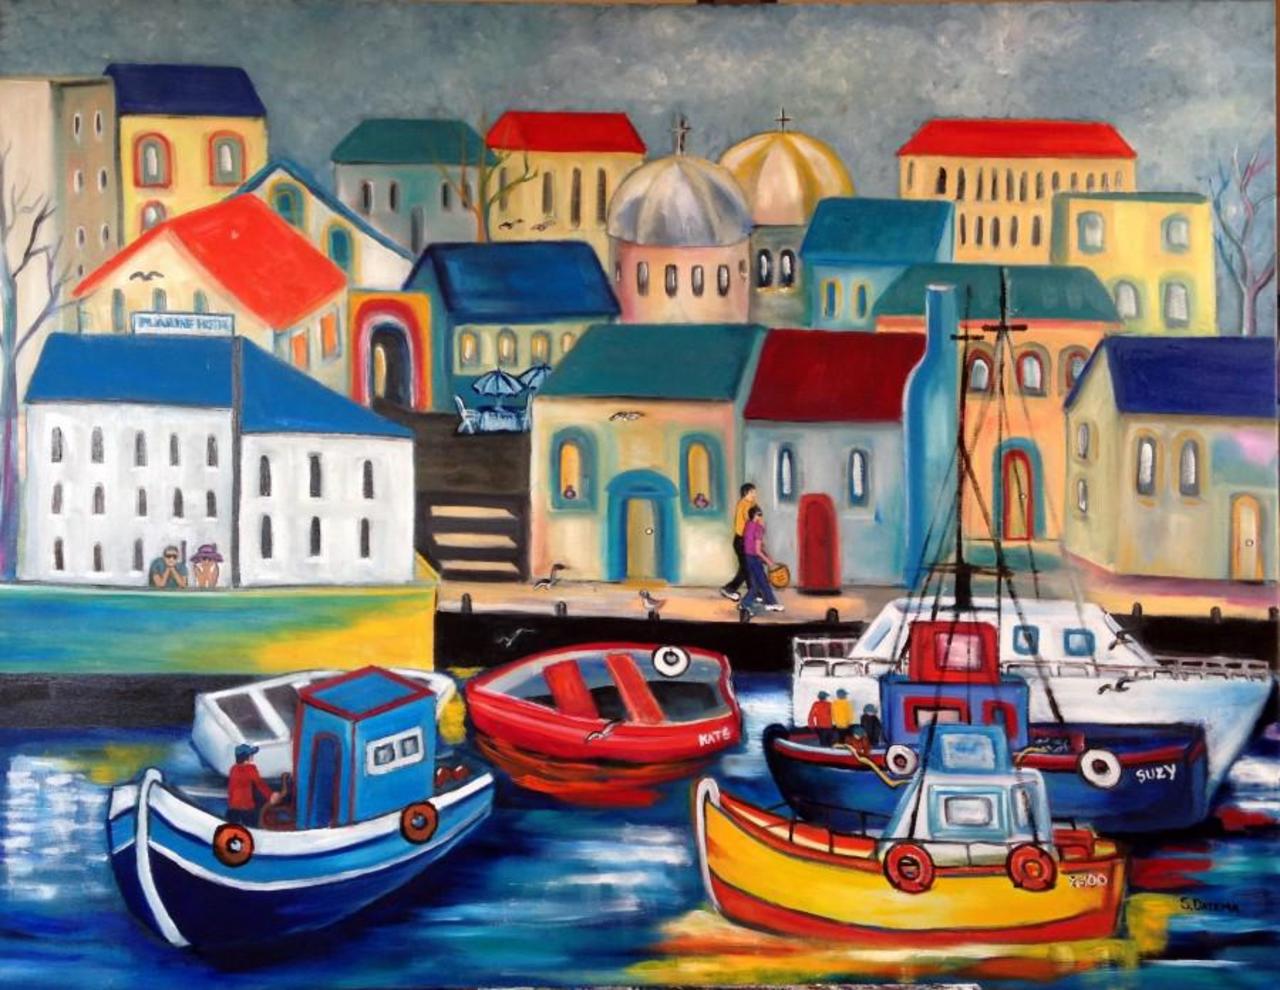 Would you like to stay in the Marine Hotel? Colourful artwork by Suzette Datema.  http://ow.ly/Os7Ah #naive #art http://t.co/suniuiY26m